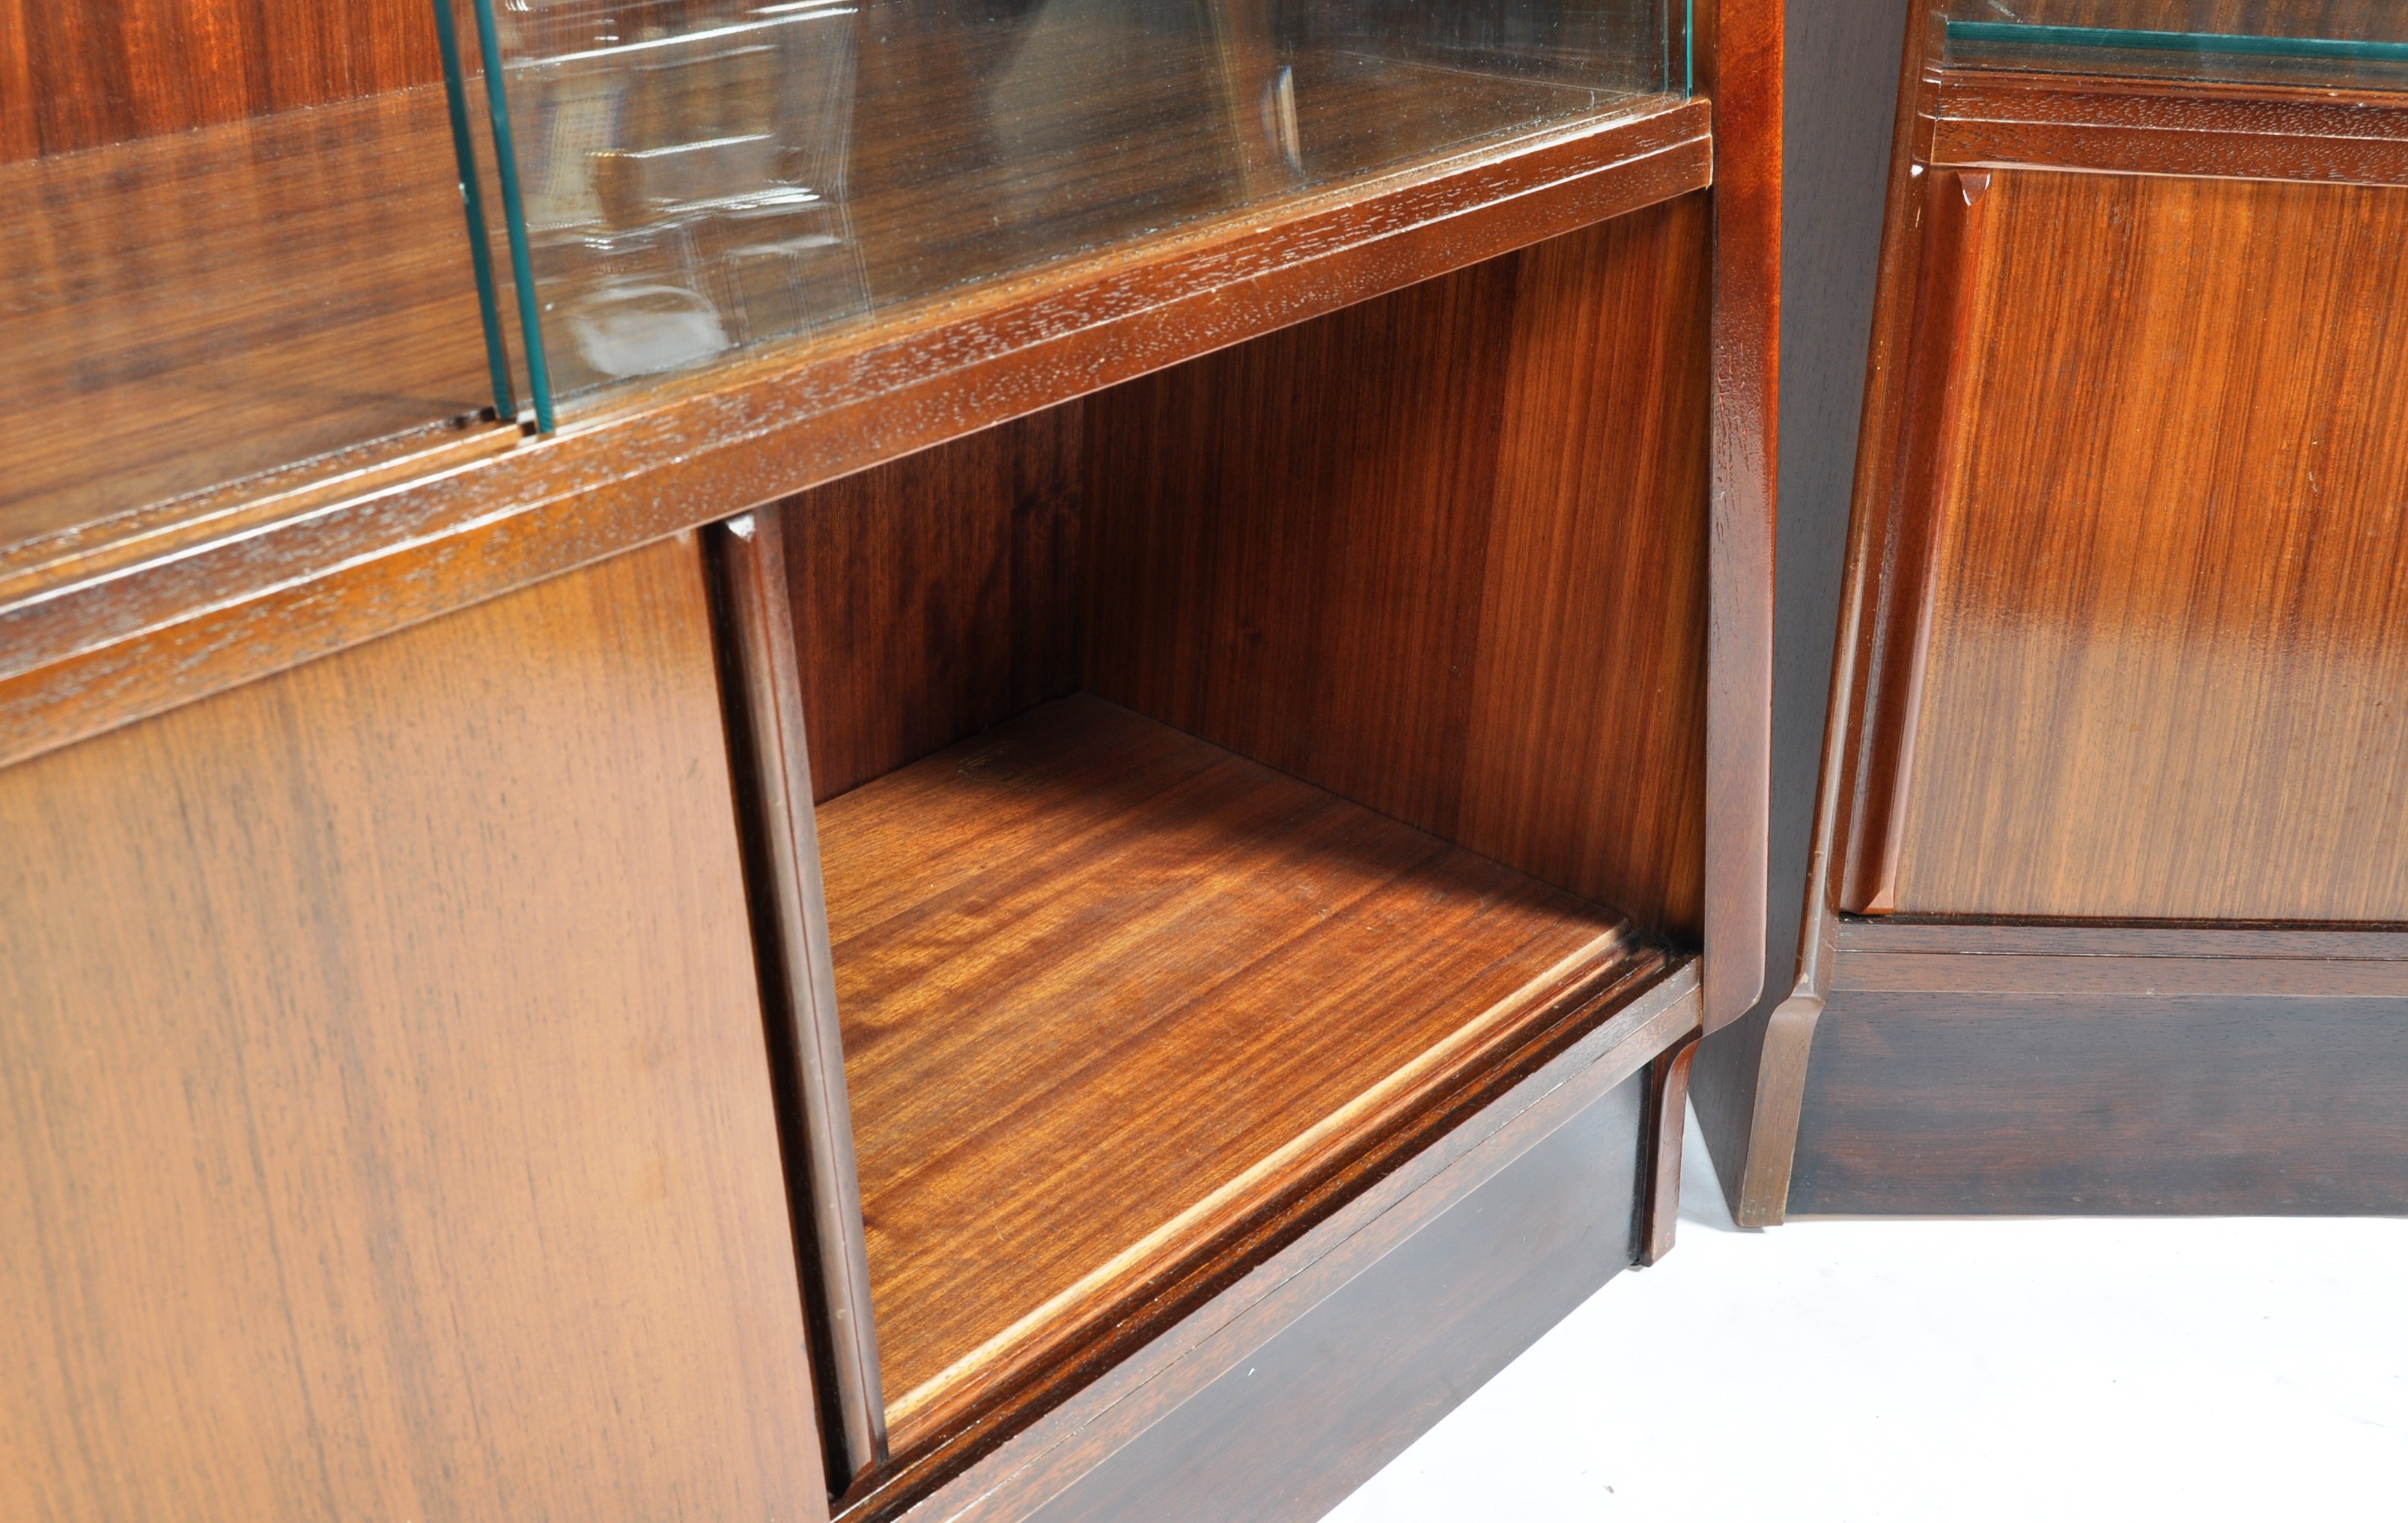 MARCHING PAIR OF MID CENTURY WALNUT BOOKCASE CABINETS - Image 5 of 10